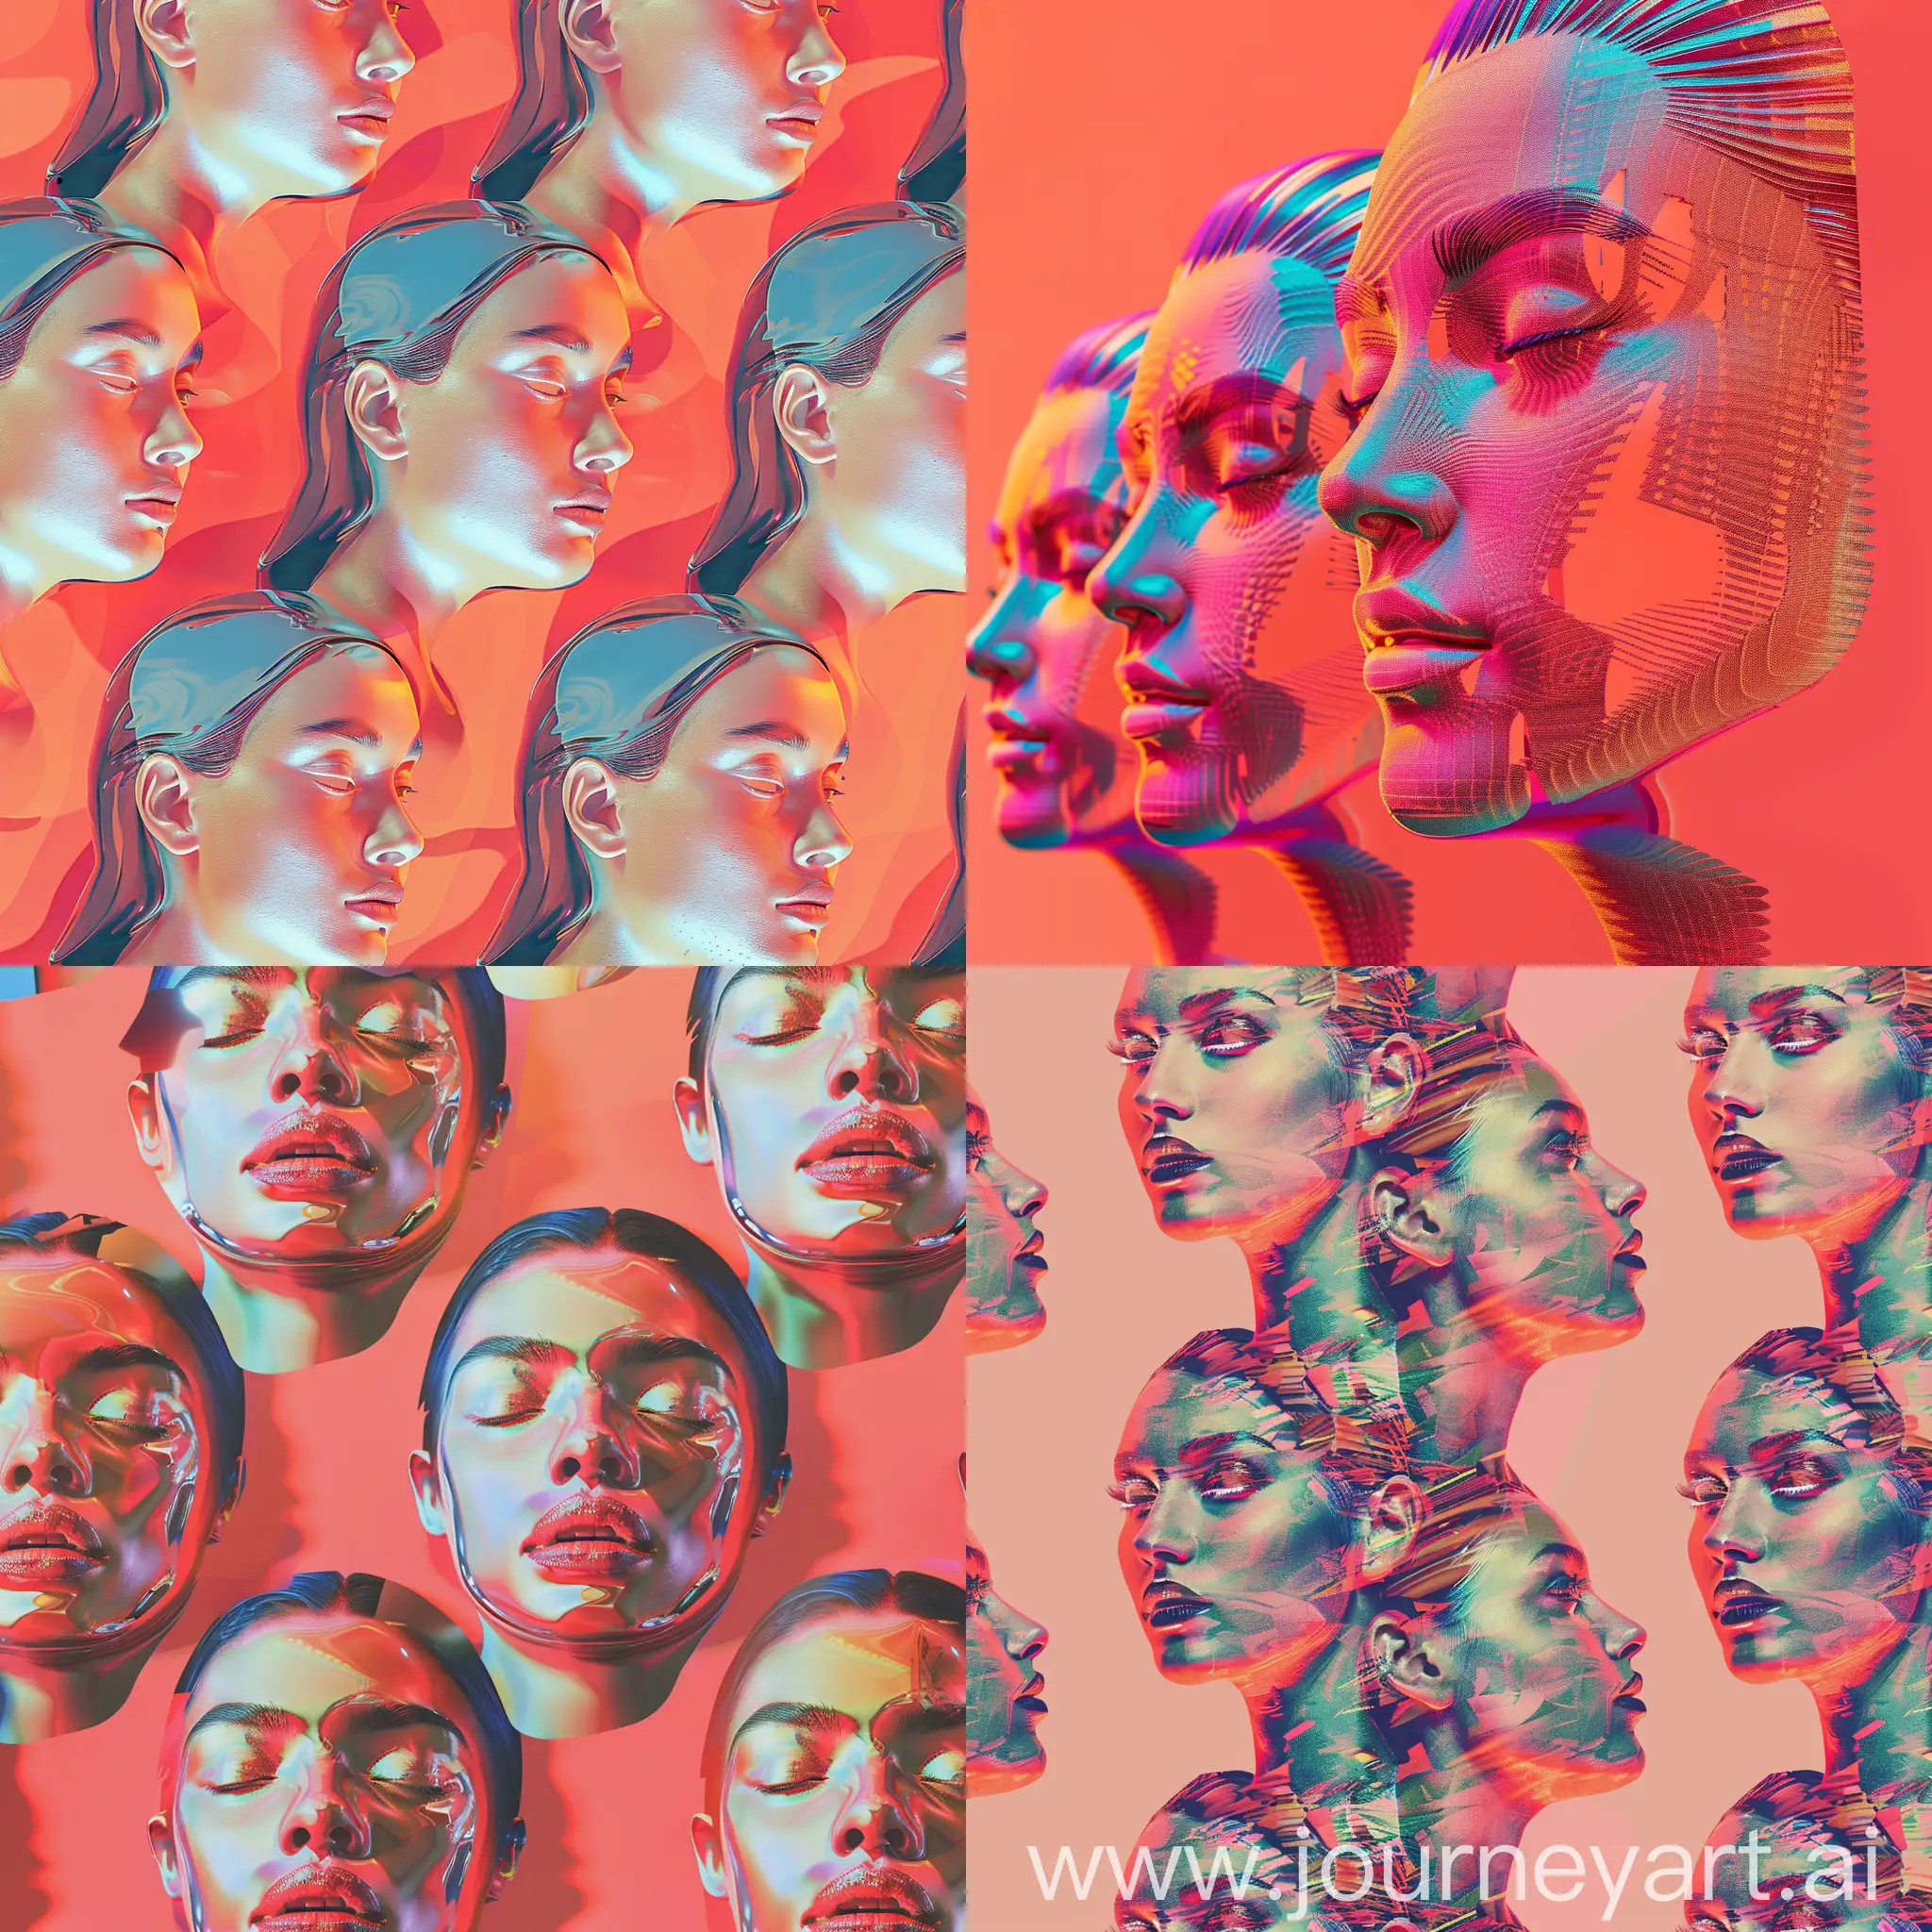 Holographic-Female-Faces-Repeated-Pattern-HyperRealistic-Portrait-Art-on-LightRed-Background